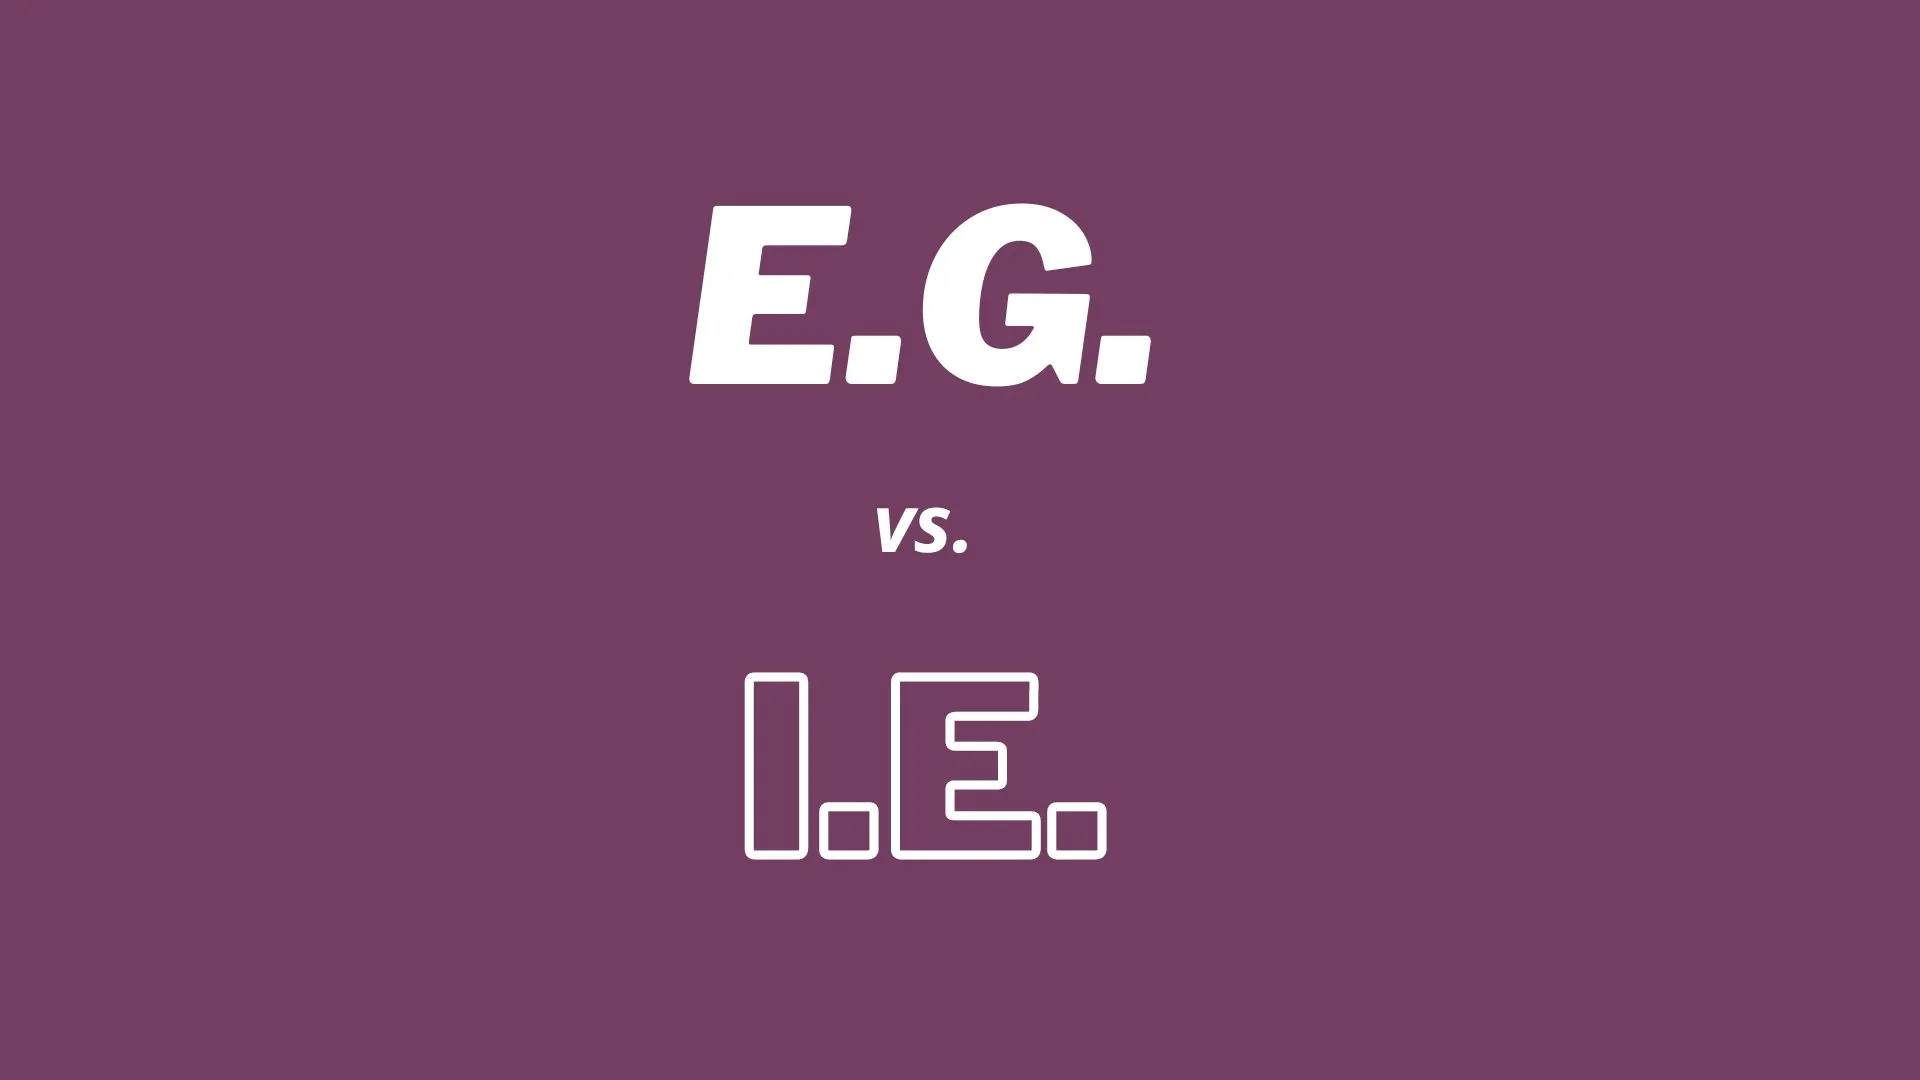 Illustration depicting the difference between "i.e." and "e.g." in Latin abbreviations and their meanings in English for English teachers and learners.